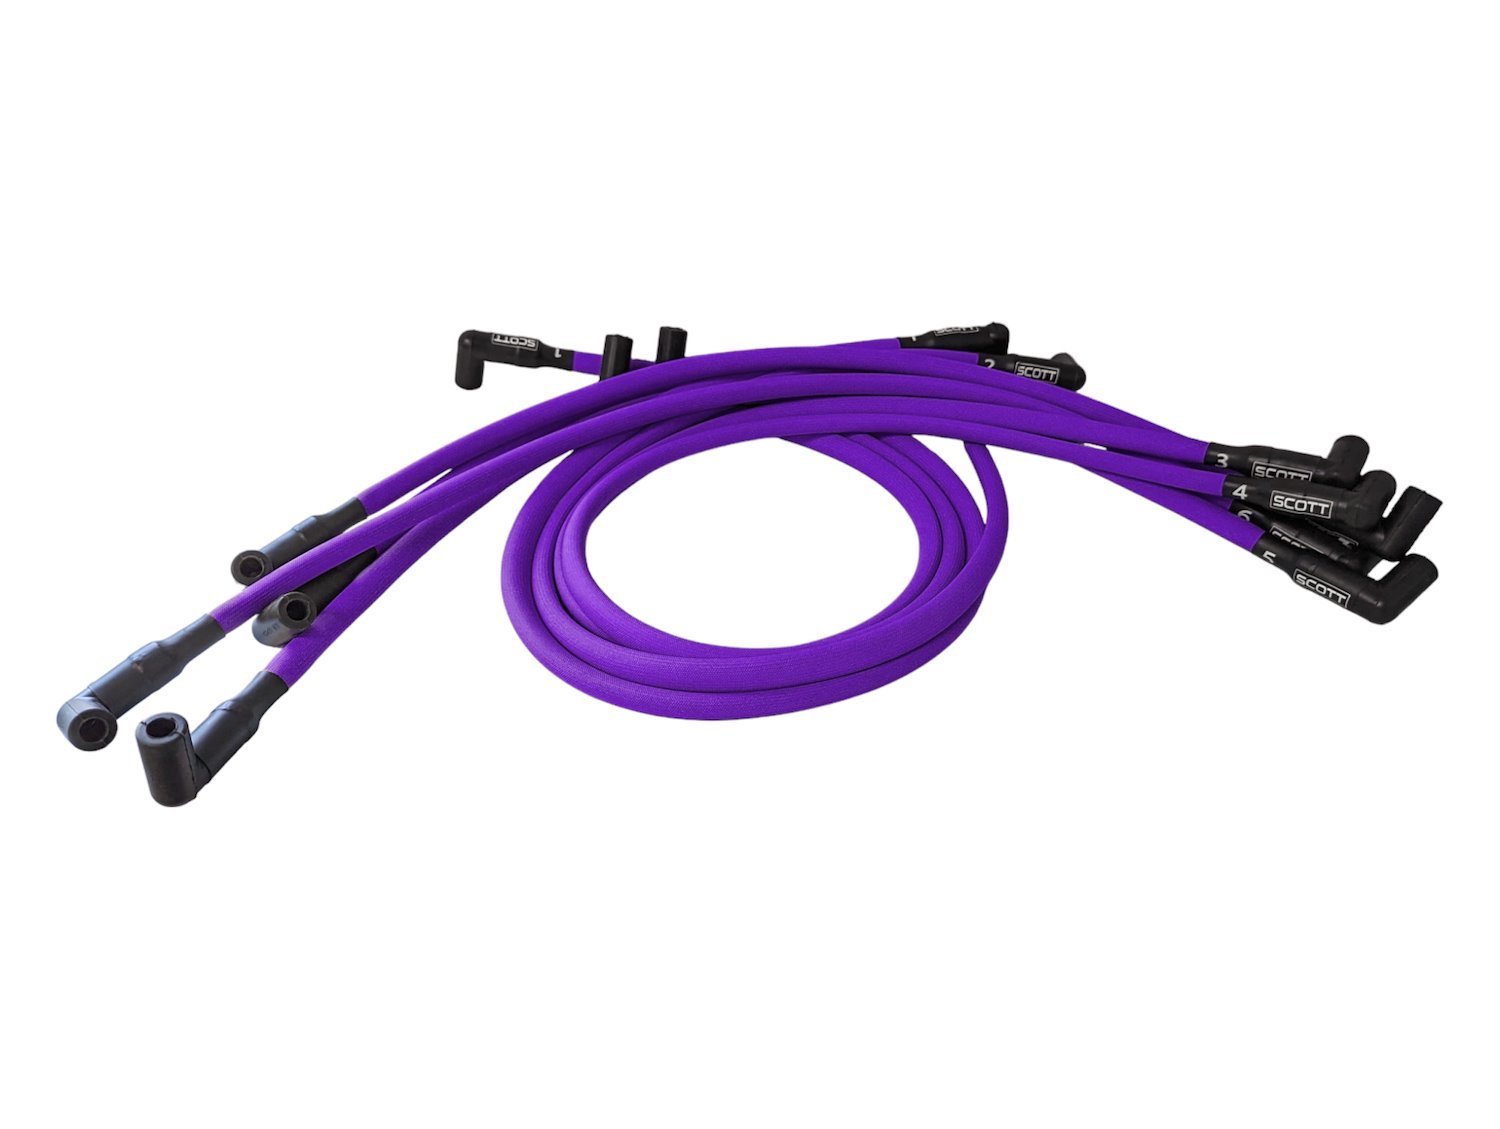 SPW-PS-516-7 High-Performance Fiberglass-Oversleeved Spark Plug Wire Set for Big Block Chevy Dragster, Under Header [Purple]